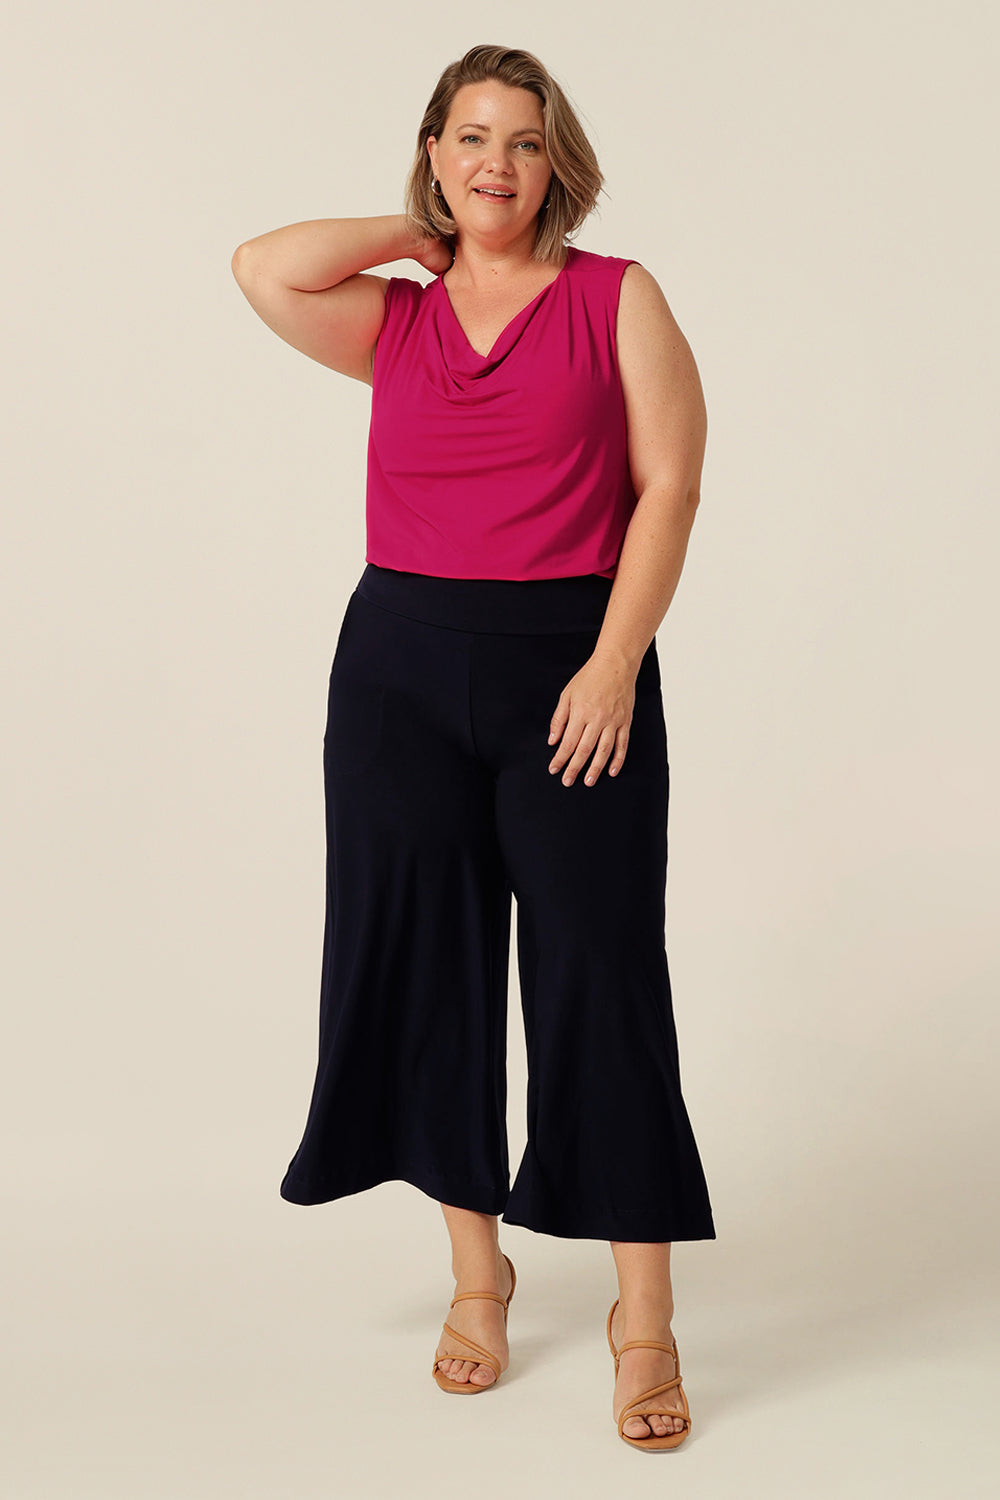 sleeveless bamboo jersey top with soft cowl-neck. Made in Australia for petite to plus size women.